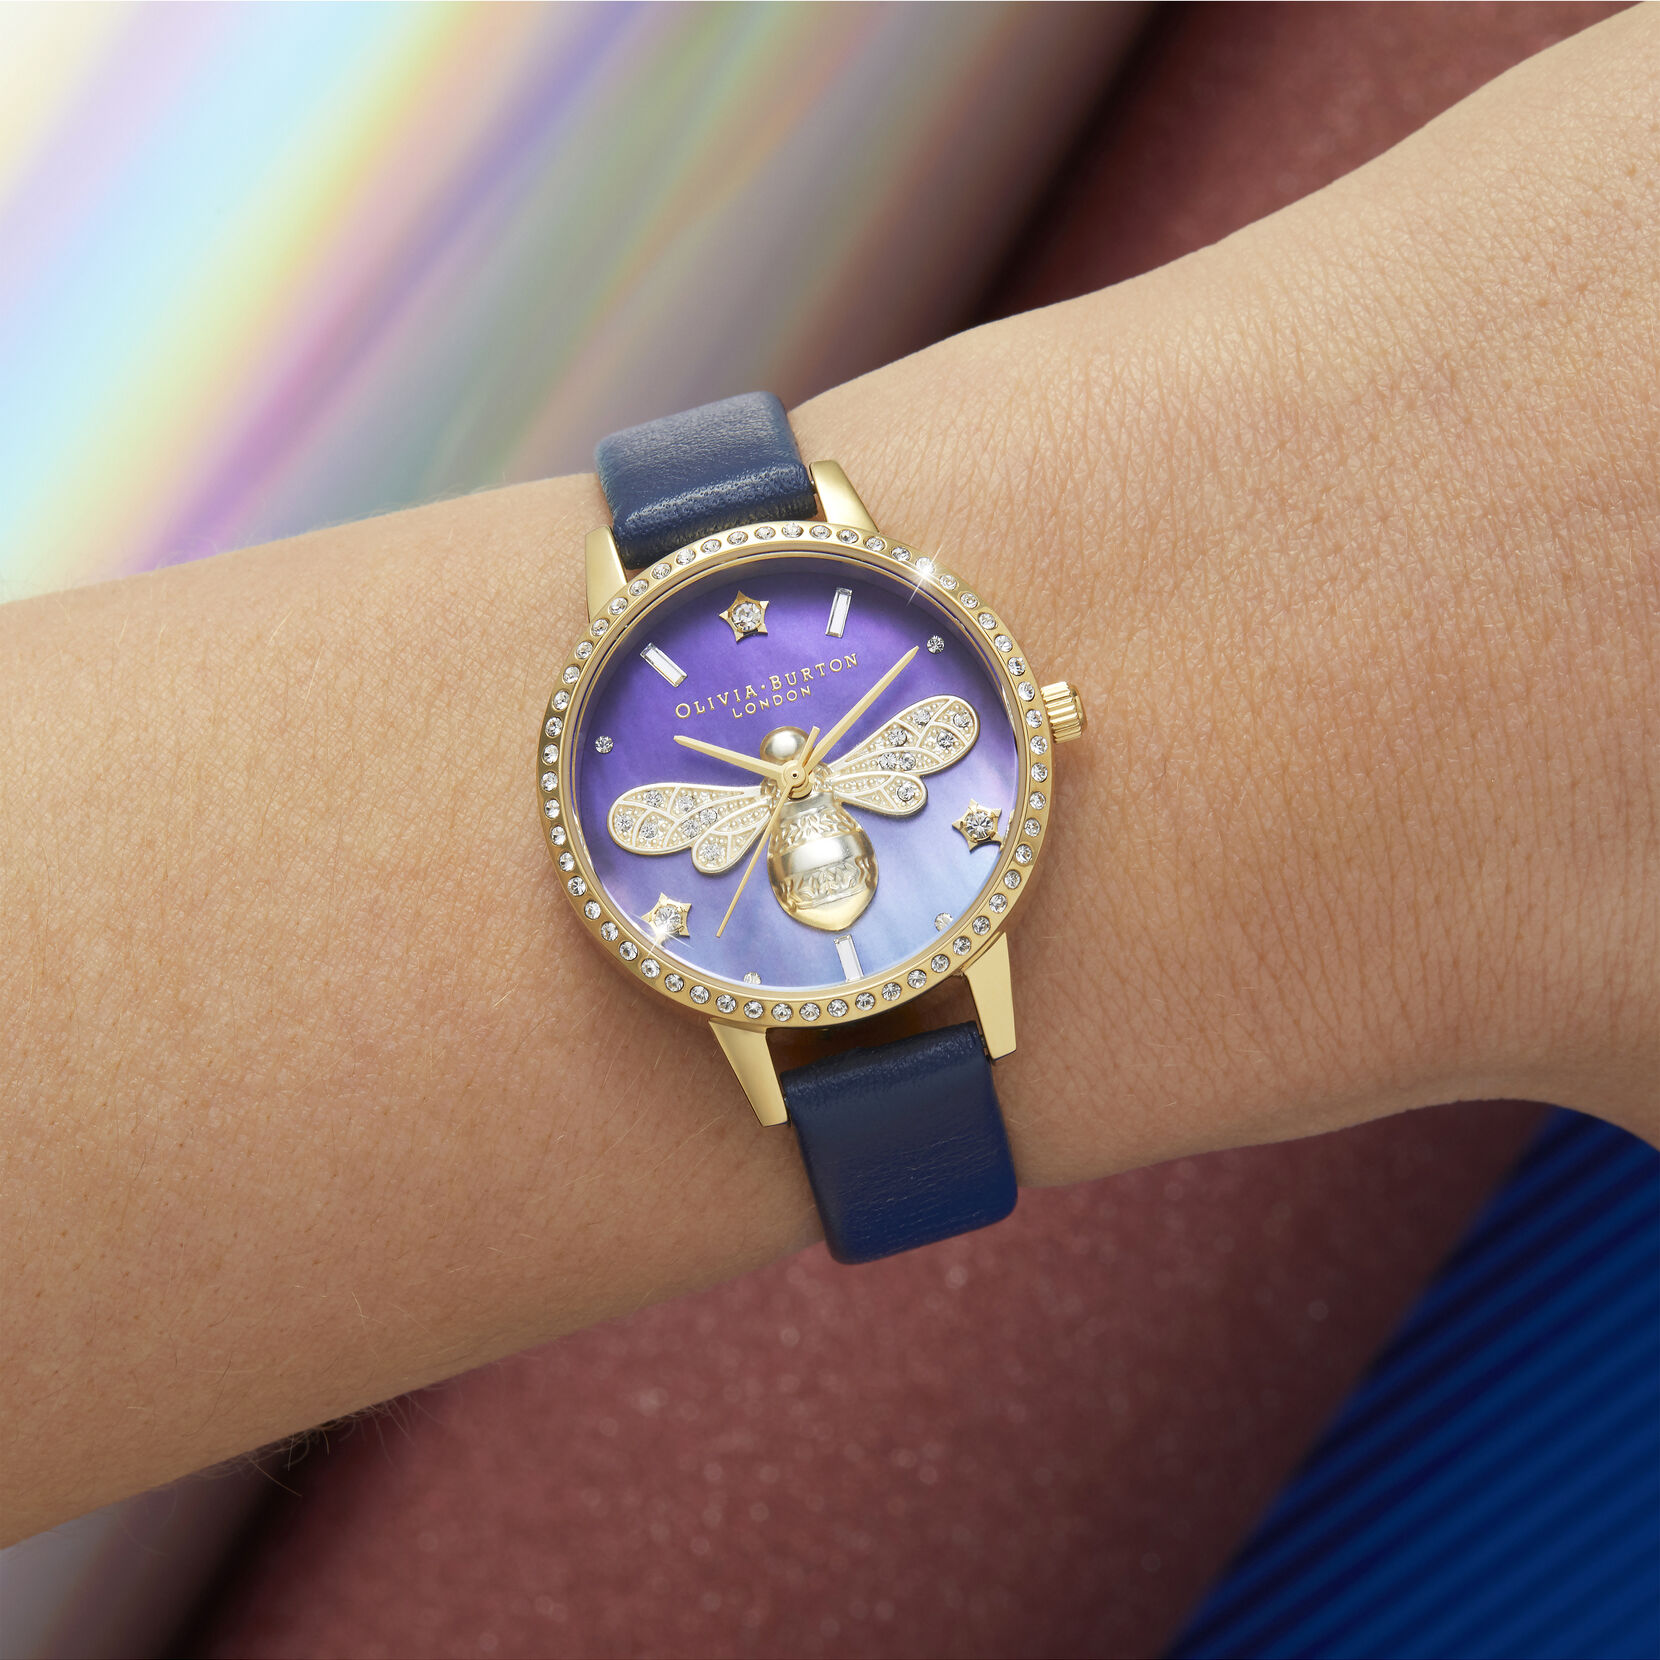 30mm Gold & Blue Leather Strap Watch